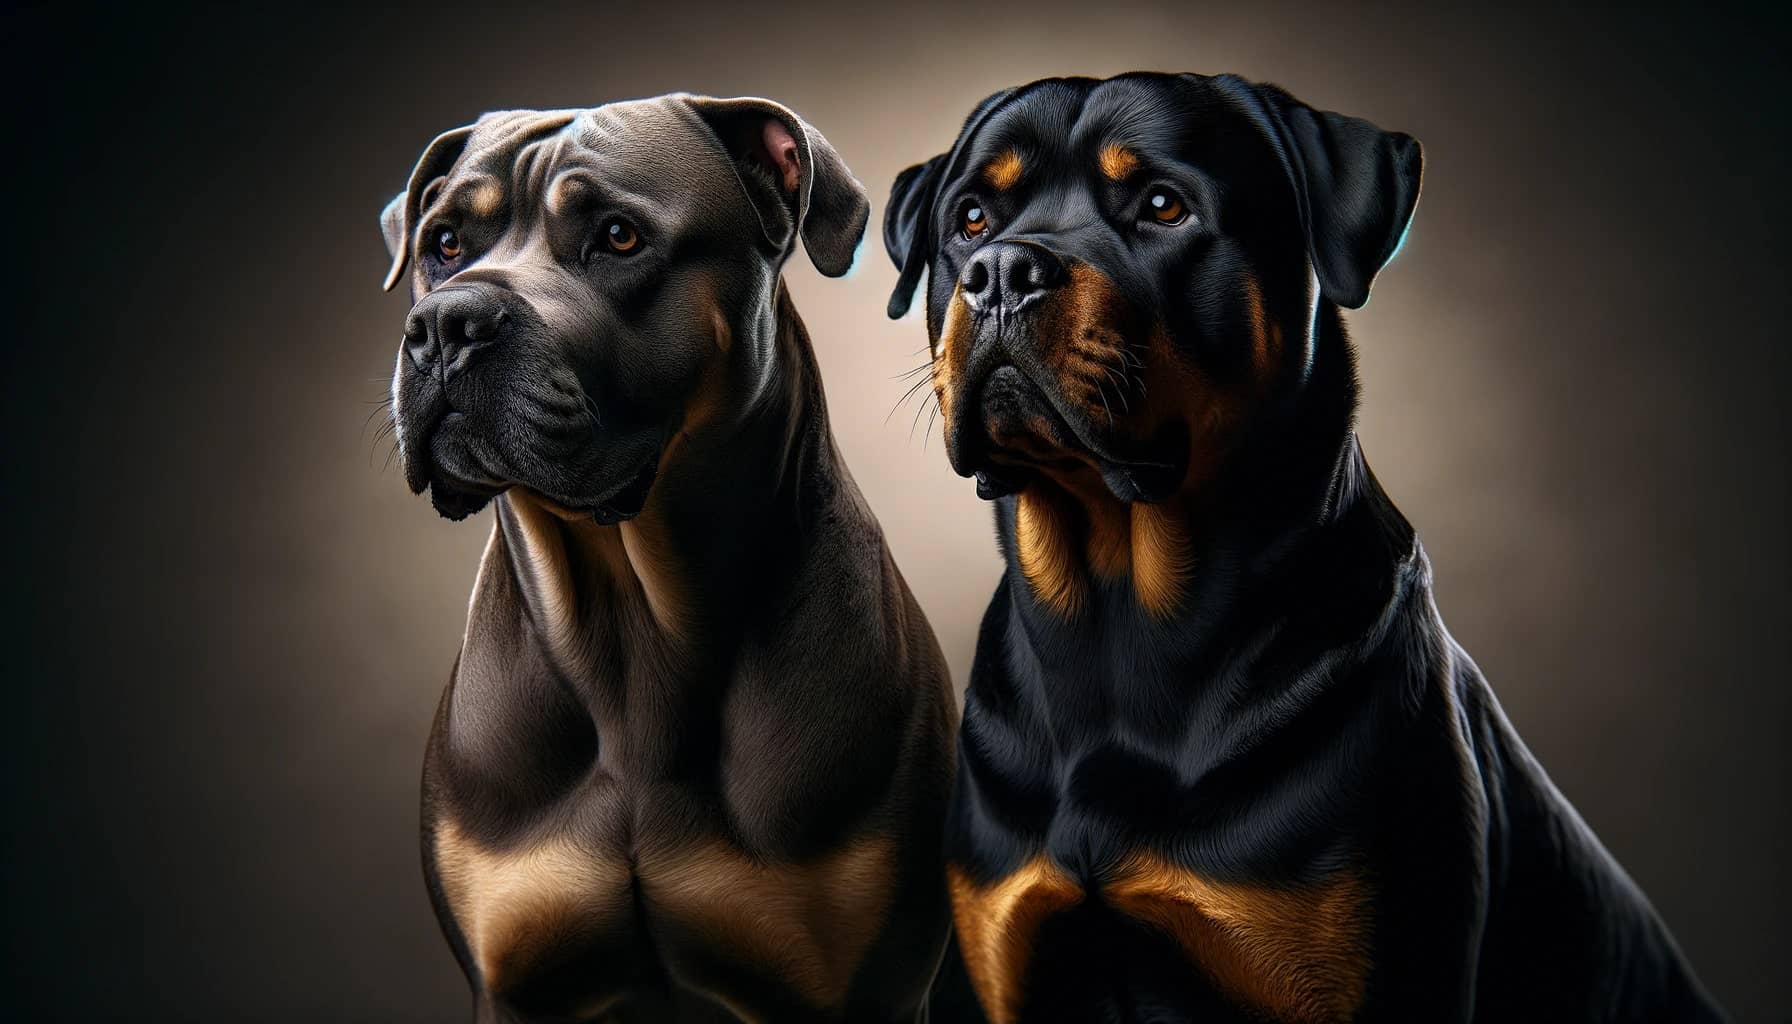 powerful Cane Corso and a robust Rottweiler side by side, captured with a focus that highlights their individual features and shared dedication as guard dogs